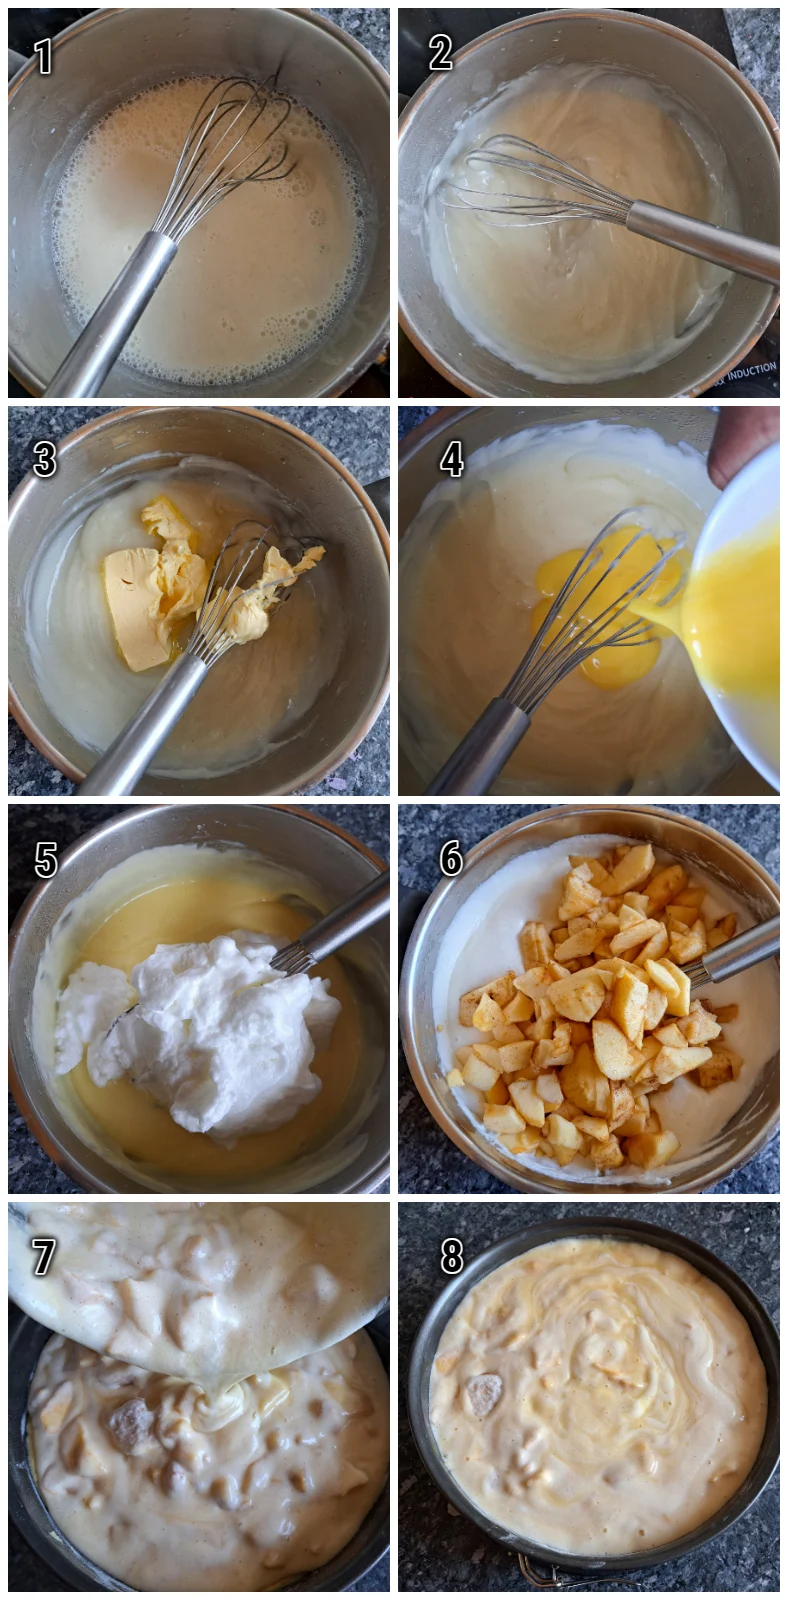 Step by step on how to make German apple cake with hoemade vanilla pudding.